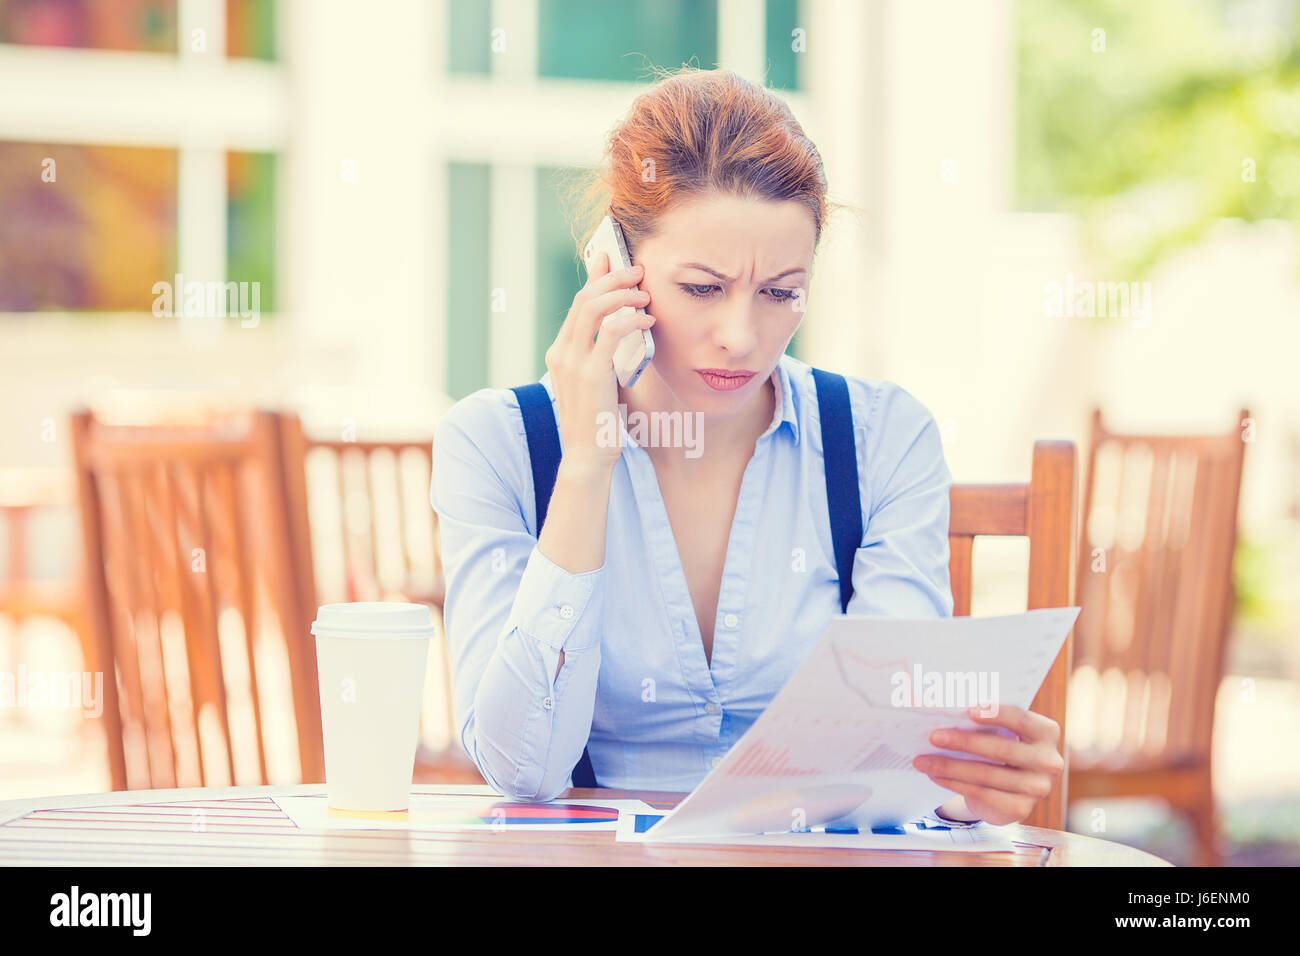 Closeup portrait upset sad, skeptical, unhappy, serious woman talking on phone holding looking at documents outside corporate office background. Negat Stock Photo